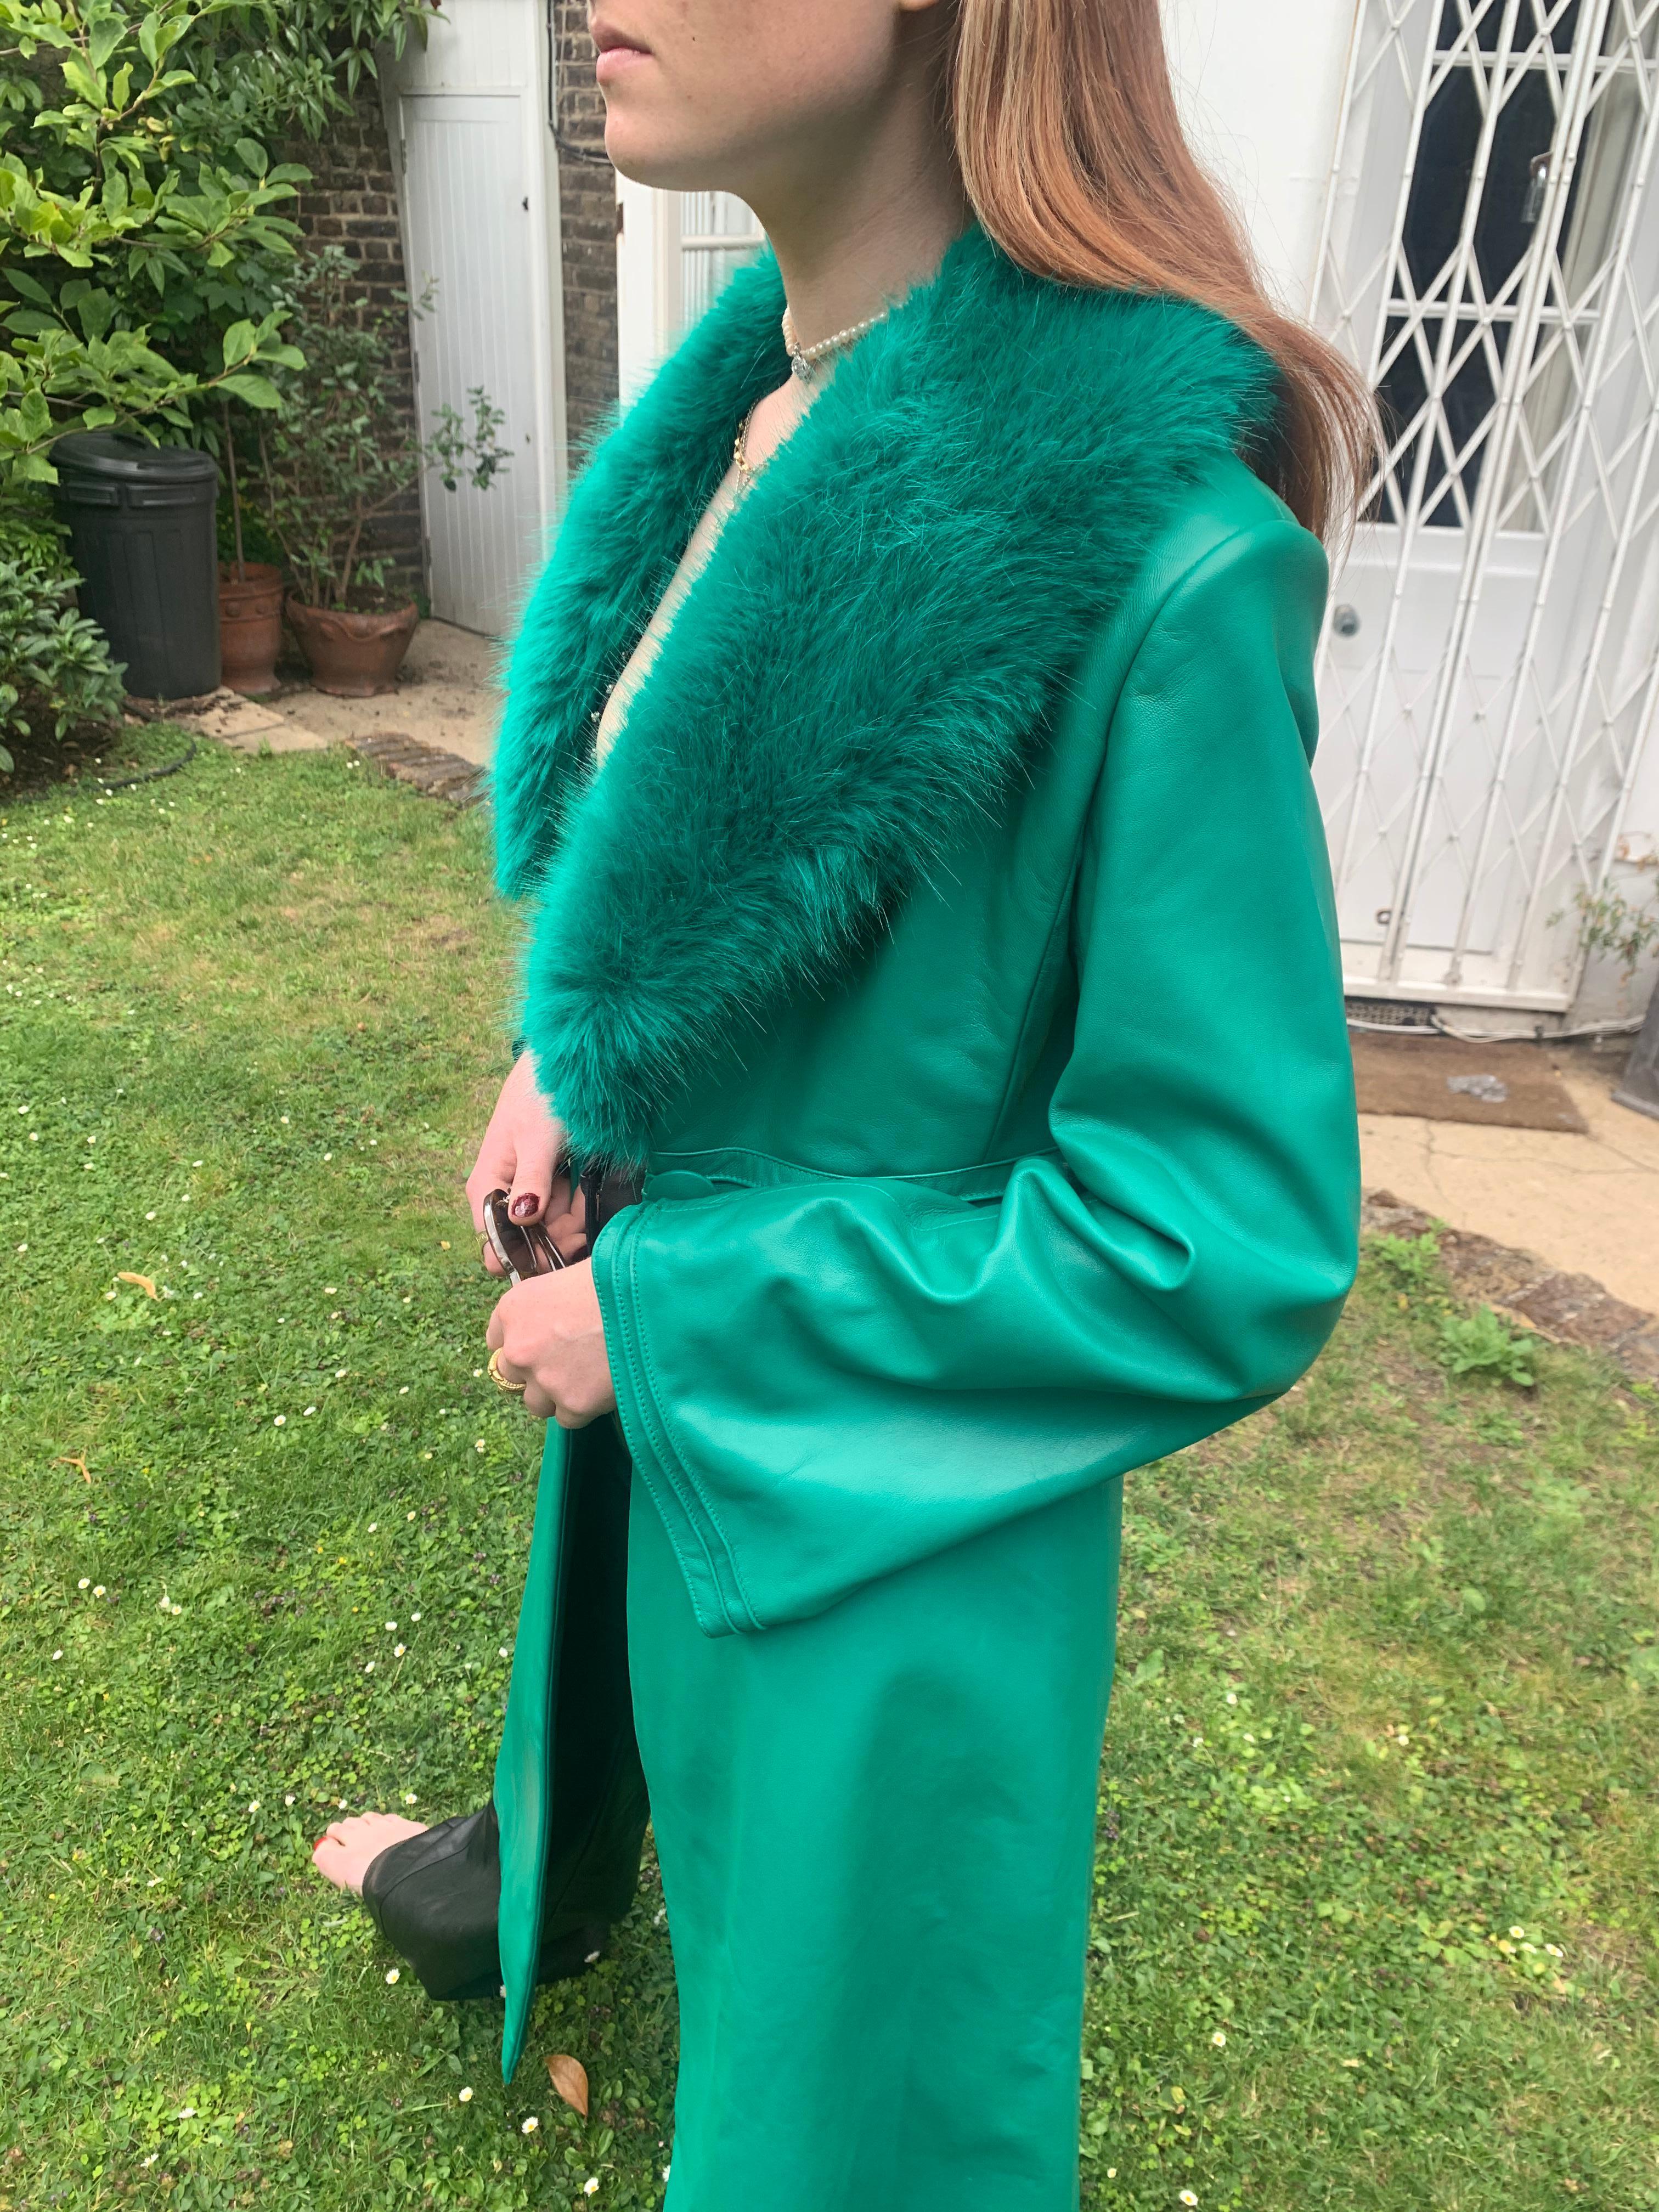 Verheyen London Edward Leather Coat in Emerald Green & Green Faux Fur - Size 10 UK 

The Edward Leather Coat created by Verheyen London is a romantic design inspired by the 1970s and Edwardian Era of Fashion.  A timeless design to be be worn for a